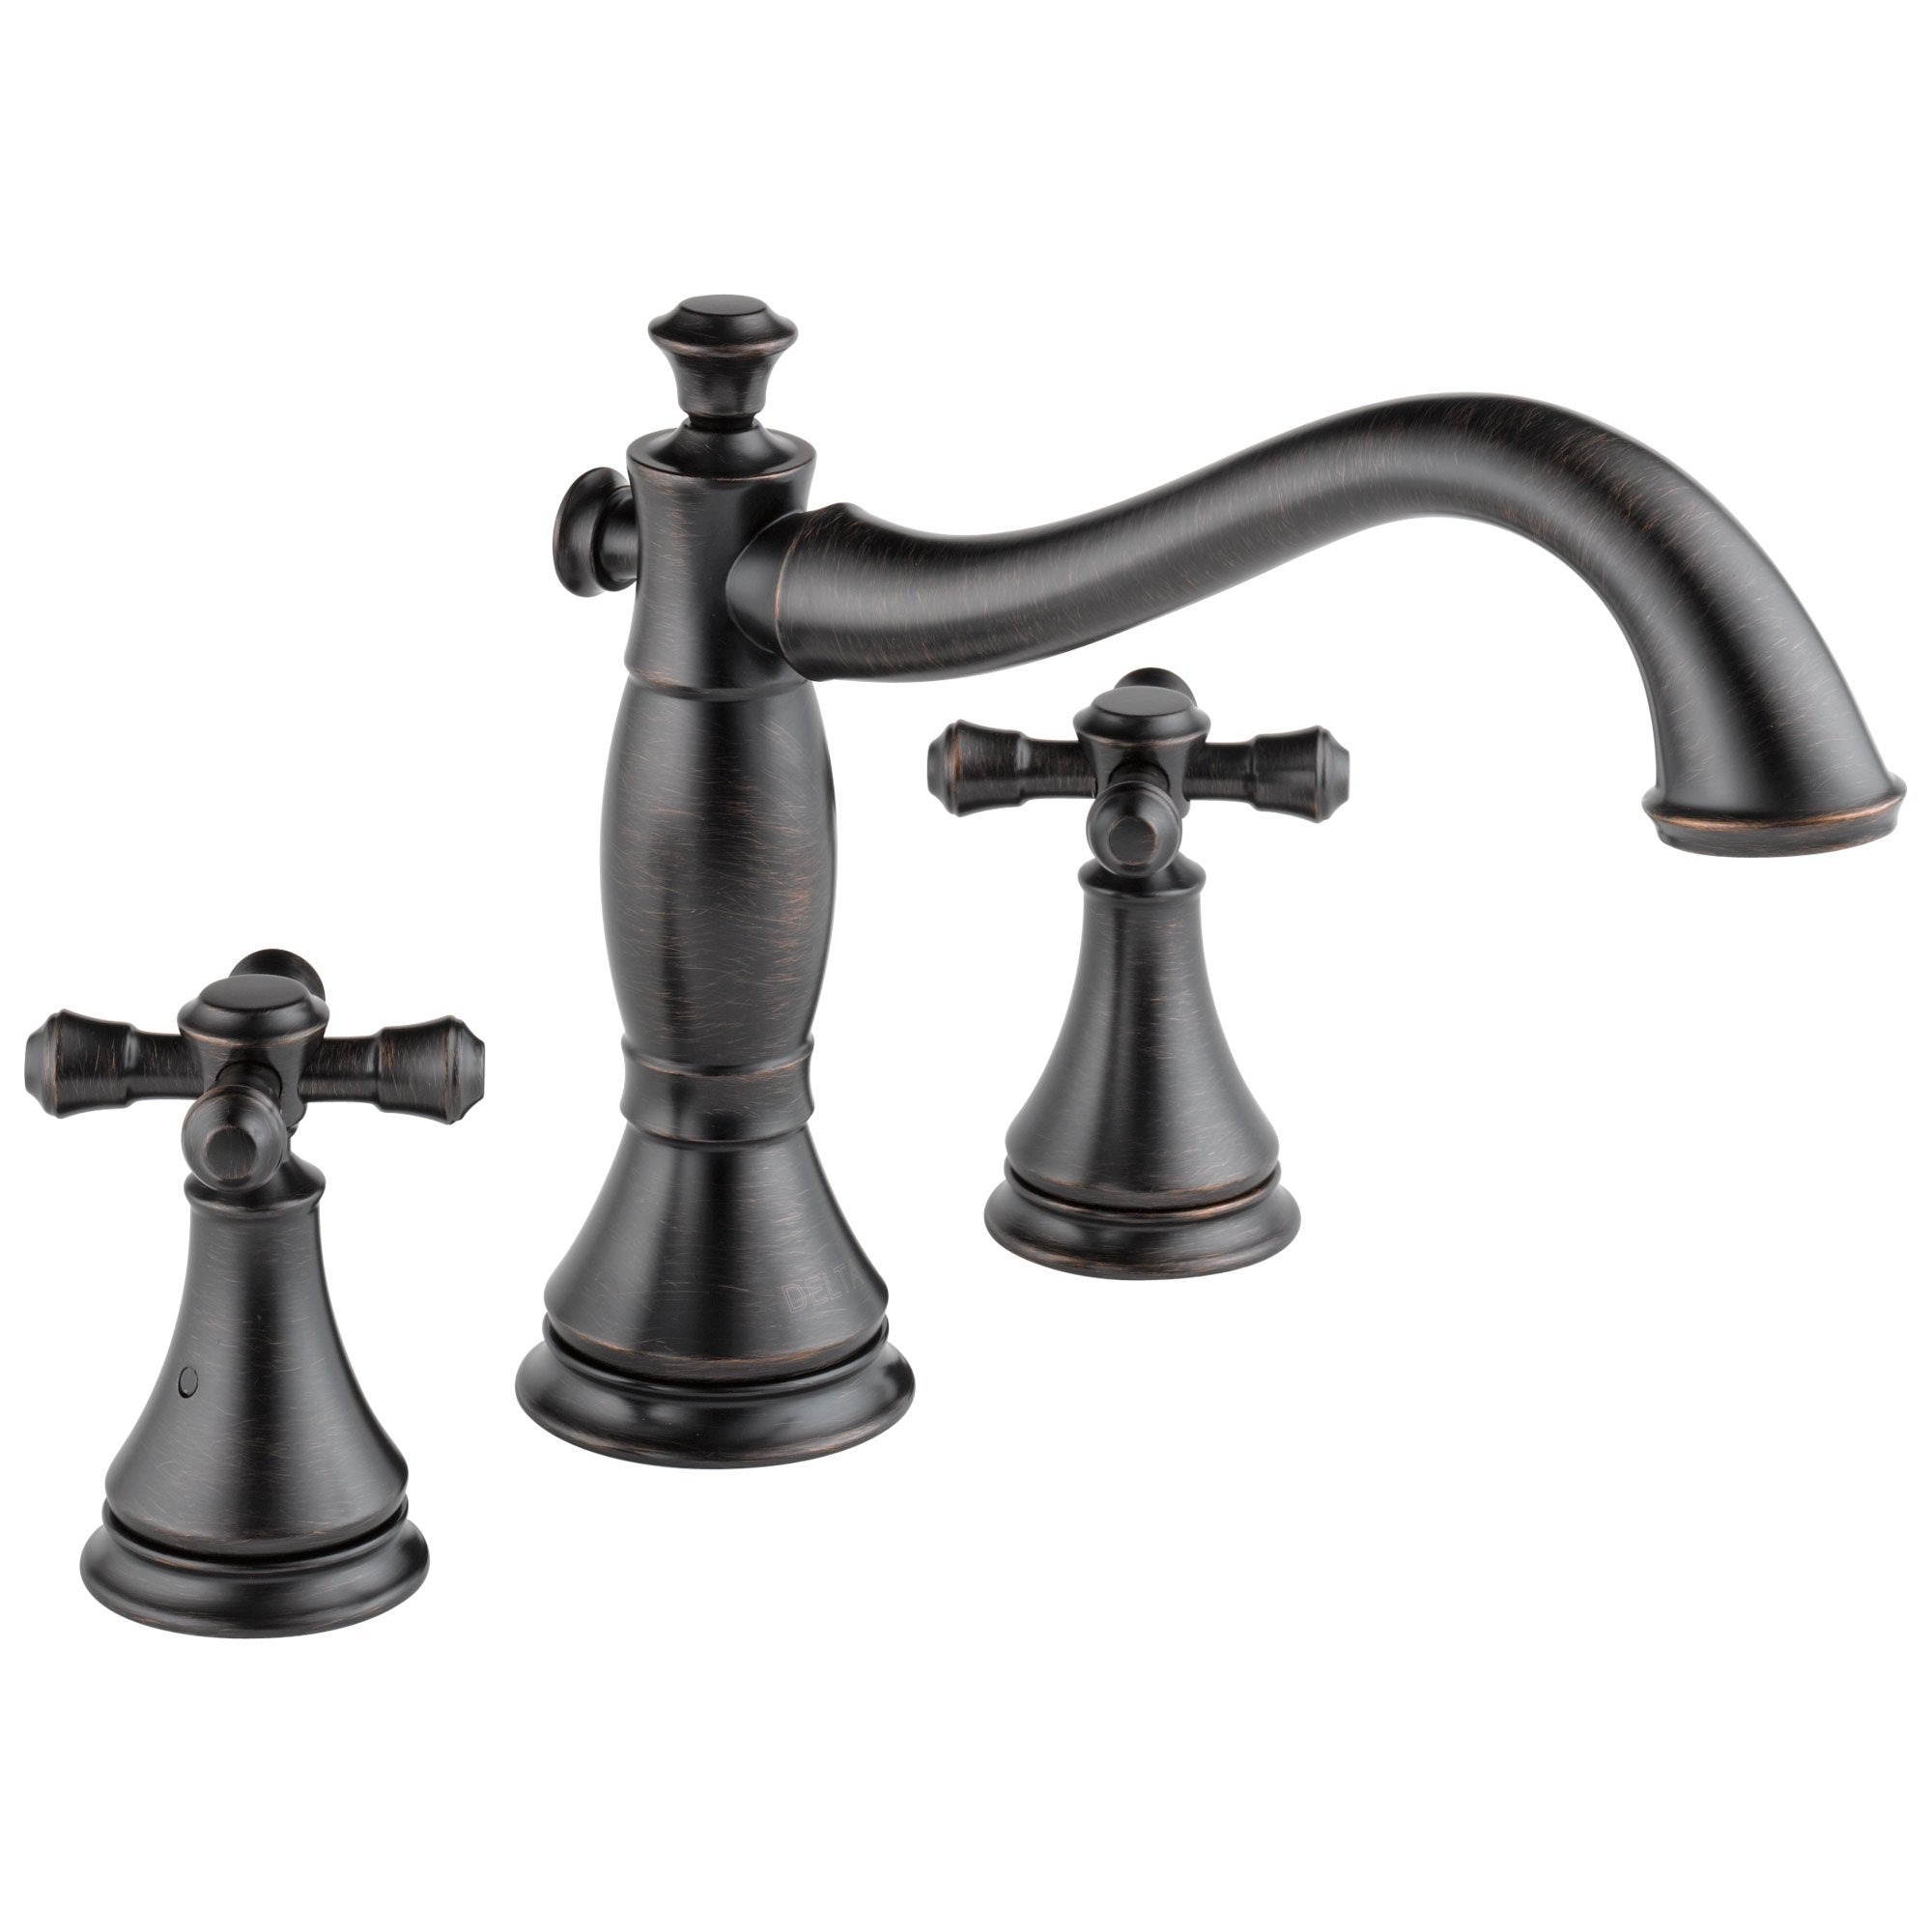 Delta Cassidy Collection Venetian Bronze Finish Roman Tub Filler Faucet COMPLETE ITEM Includes (2) Cross Style Handles and Rough-in Valve D1430V